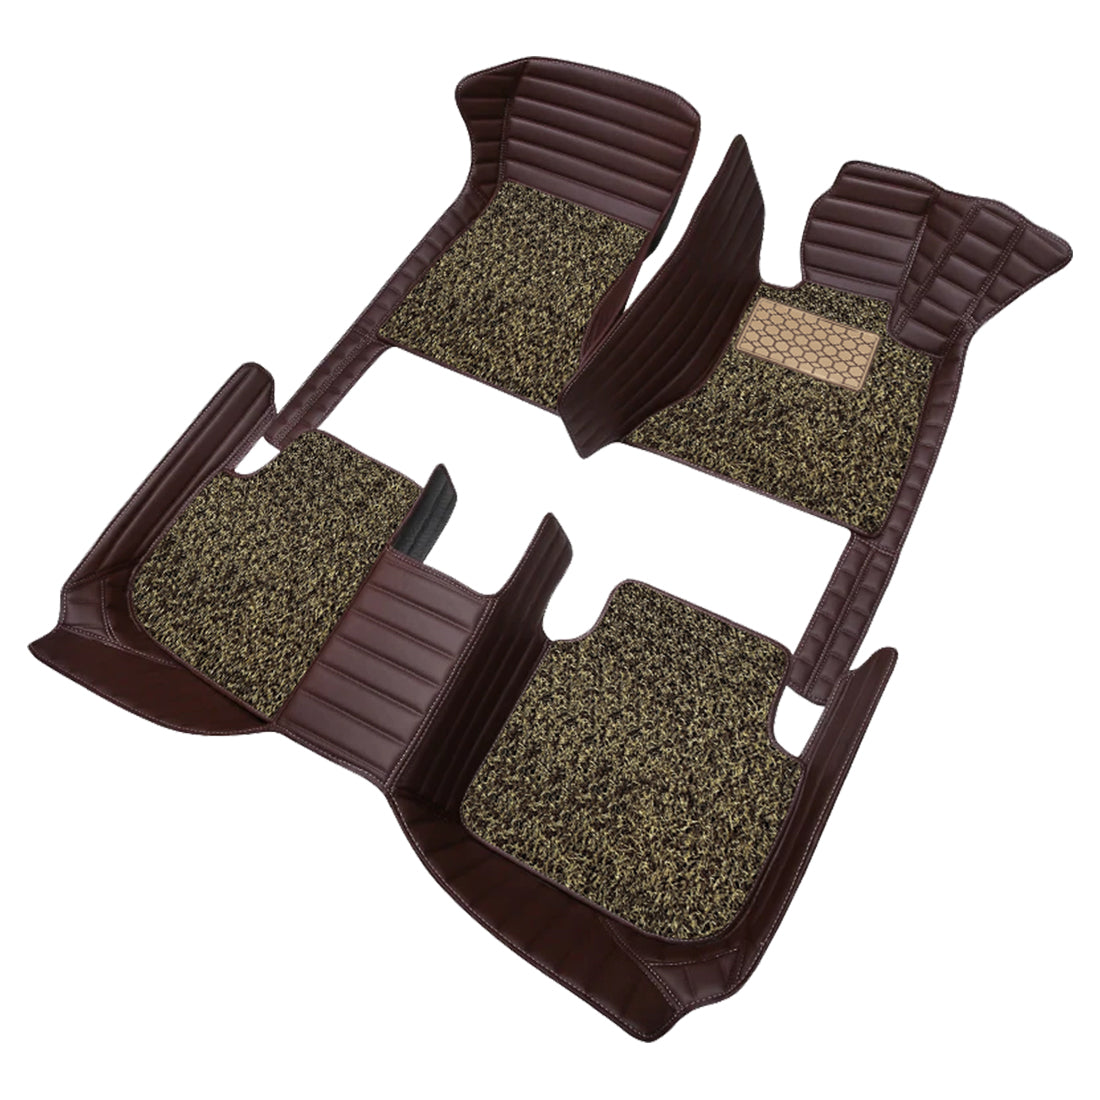 Autofurnish 9D Premium Custom Fitted Car Mats For Toyota Fortuner 2015 - Coffee Coffee